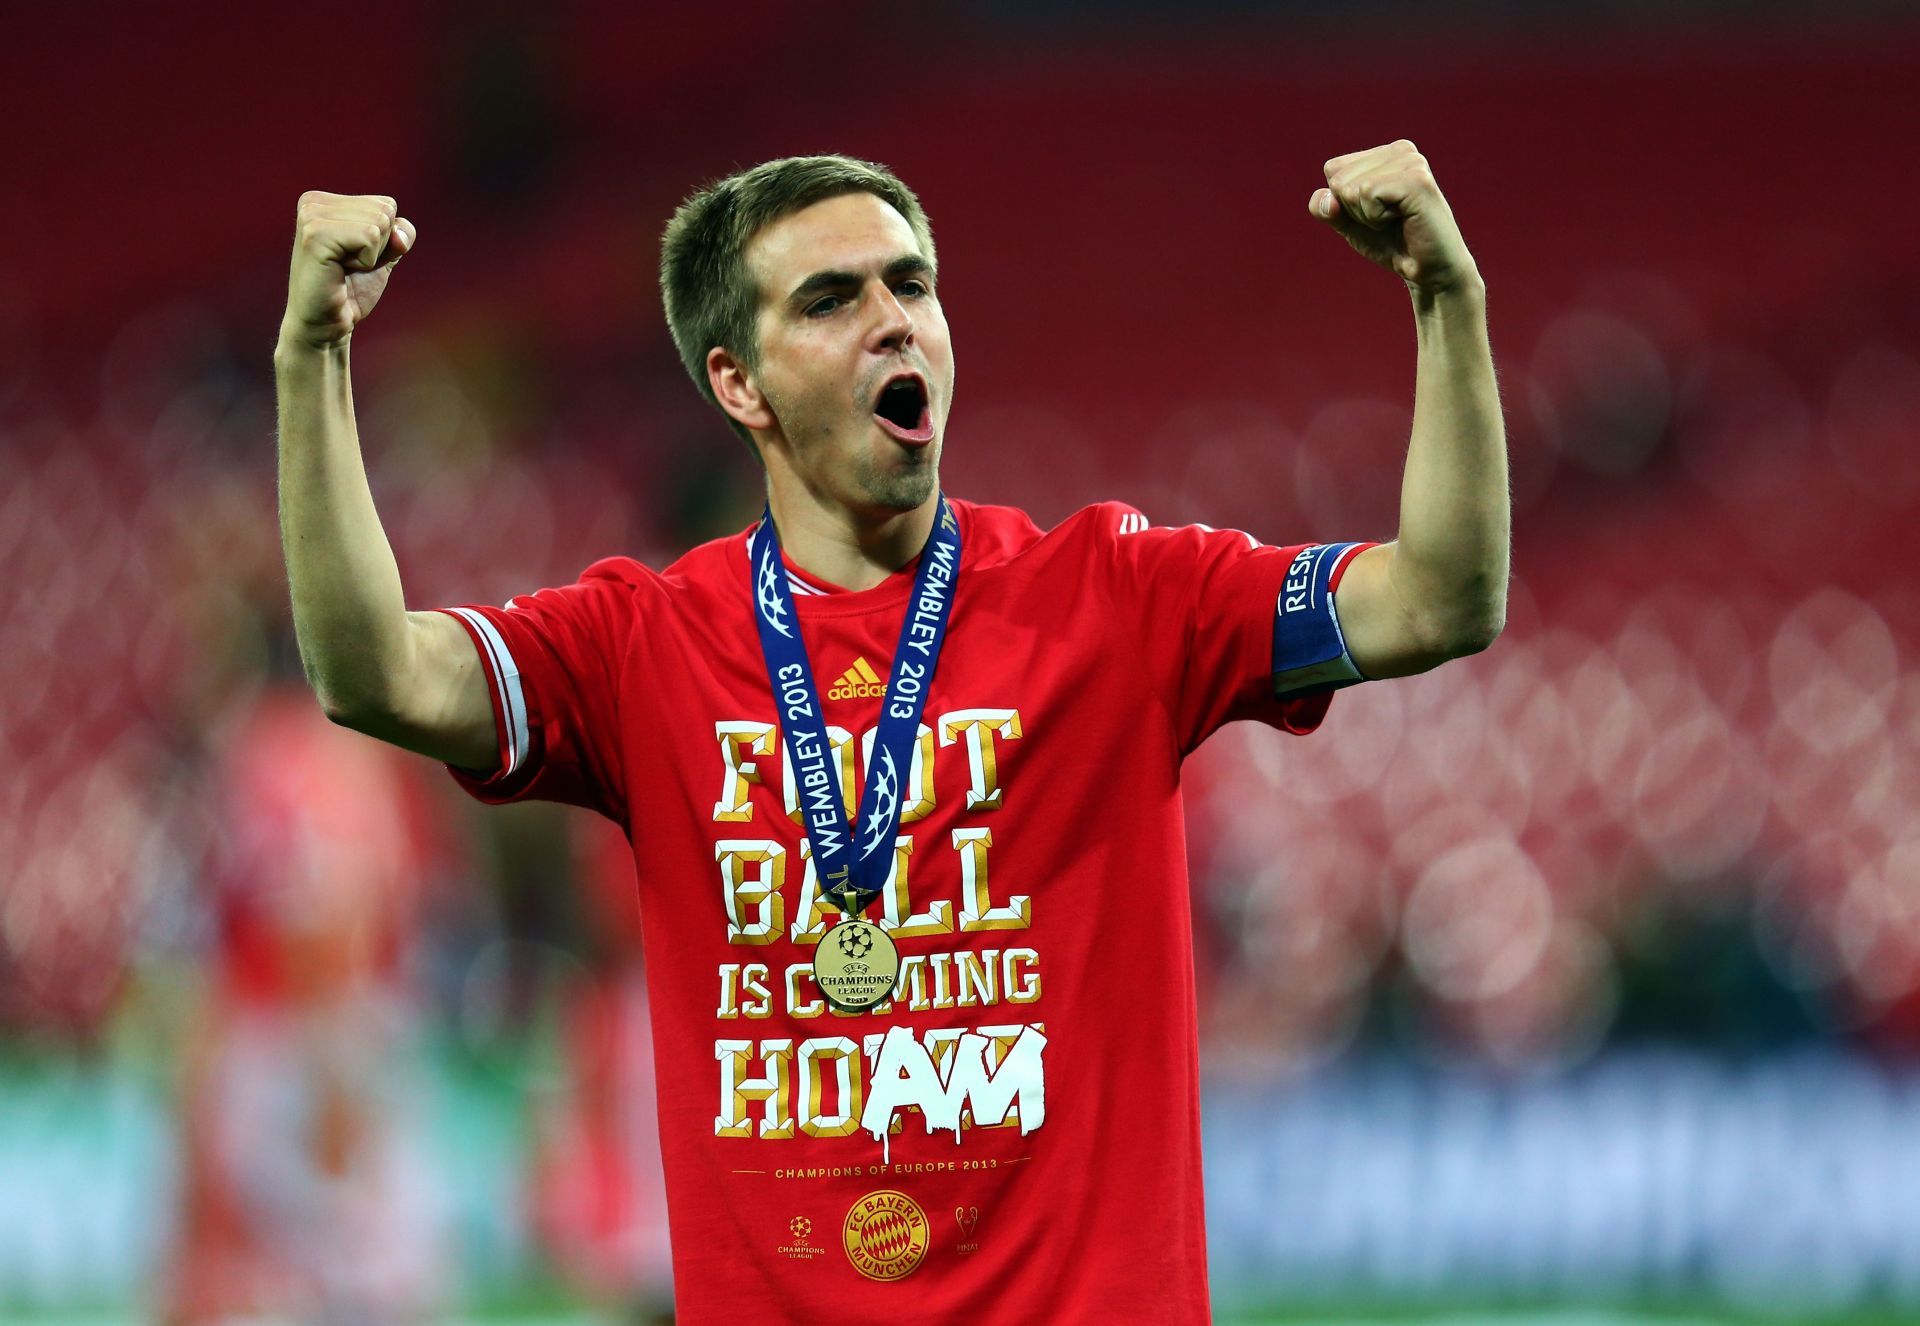 Philip Lahm holds one of the toughest records to break